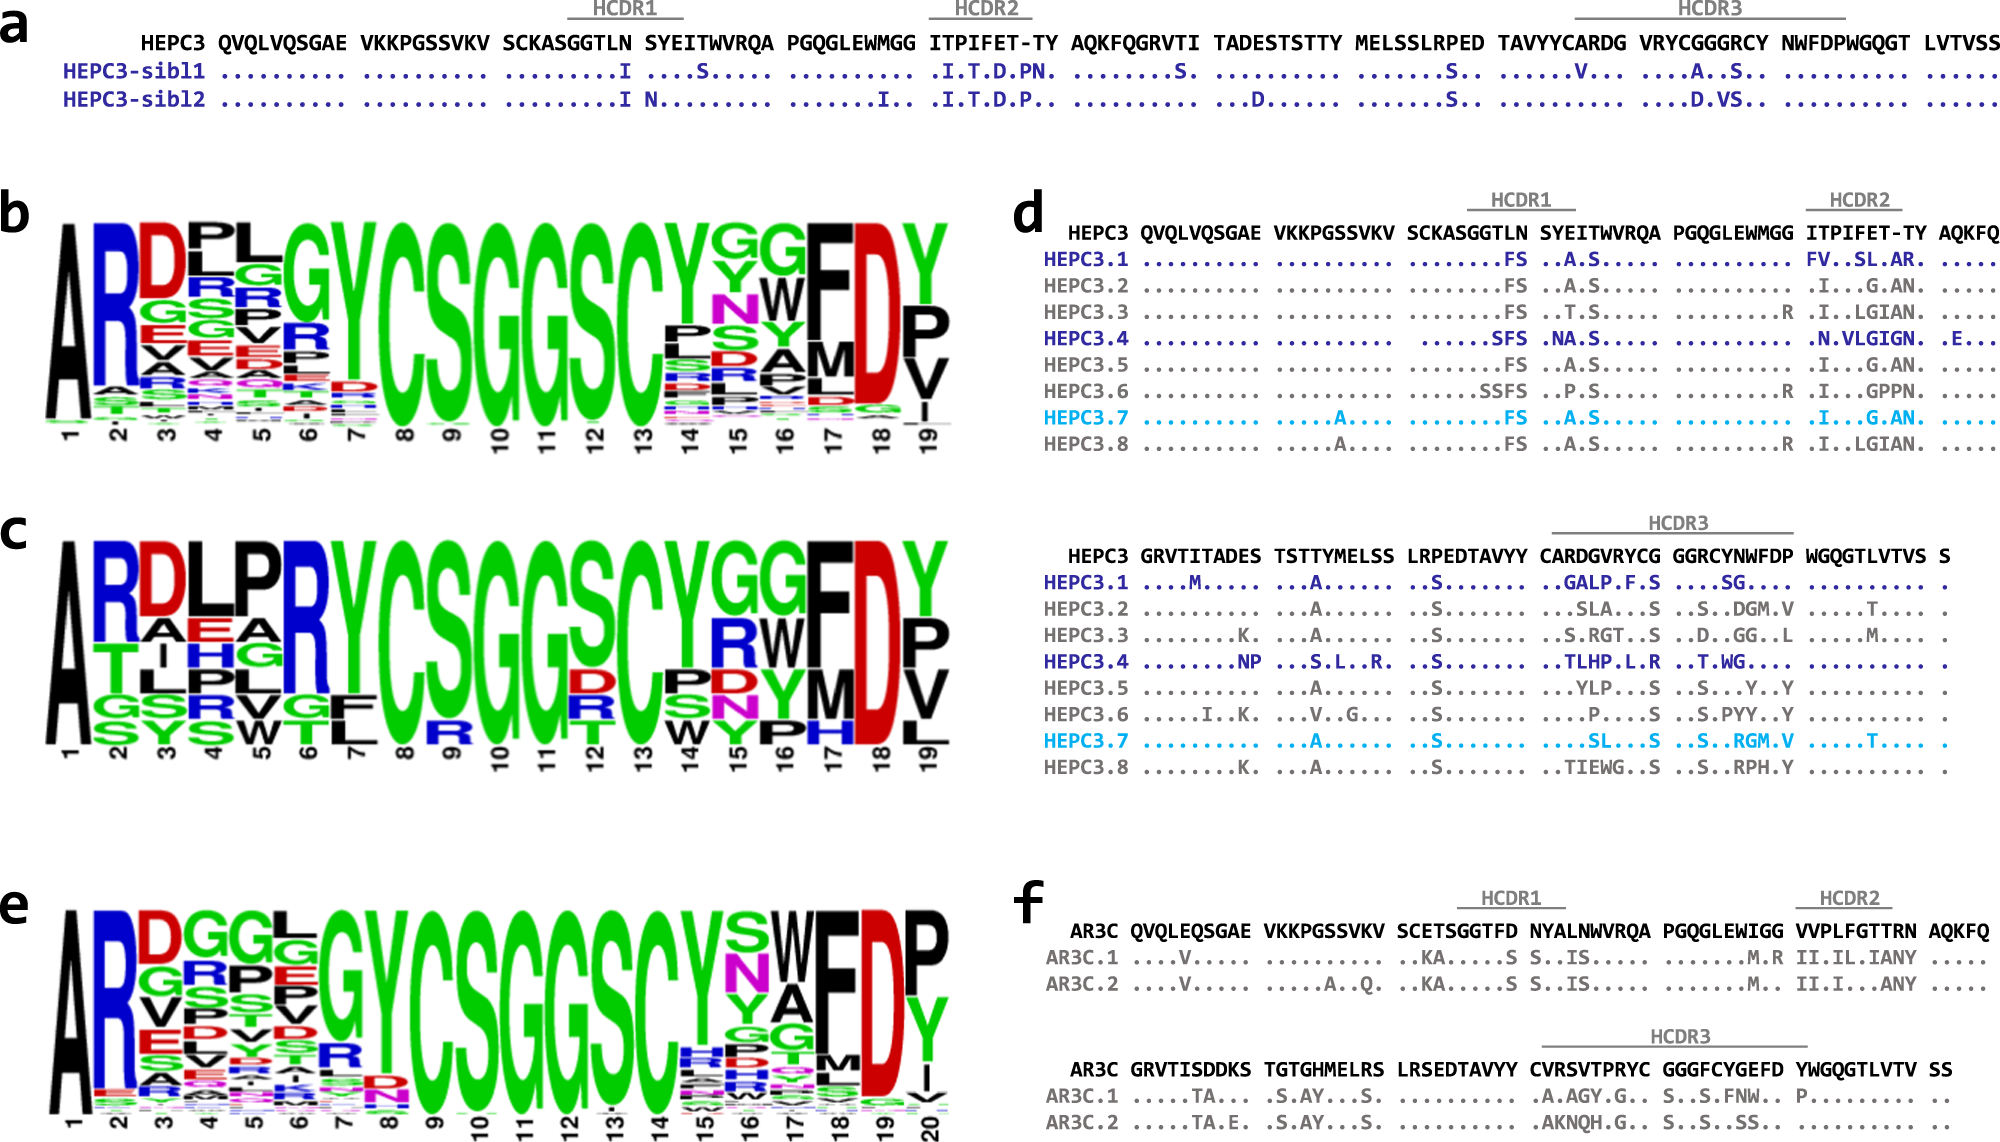 Computational identification of HCV neutralizing antibodies with a common  HCDR3 disulfide bond motif in the antibody repertoires of infected  individuals | Nature Communications